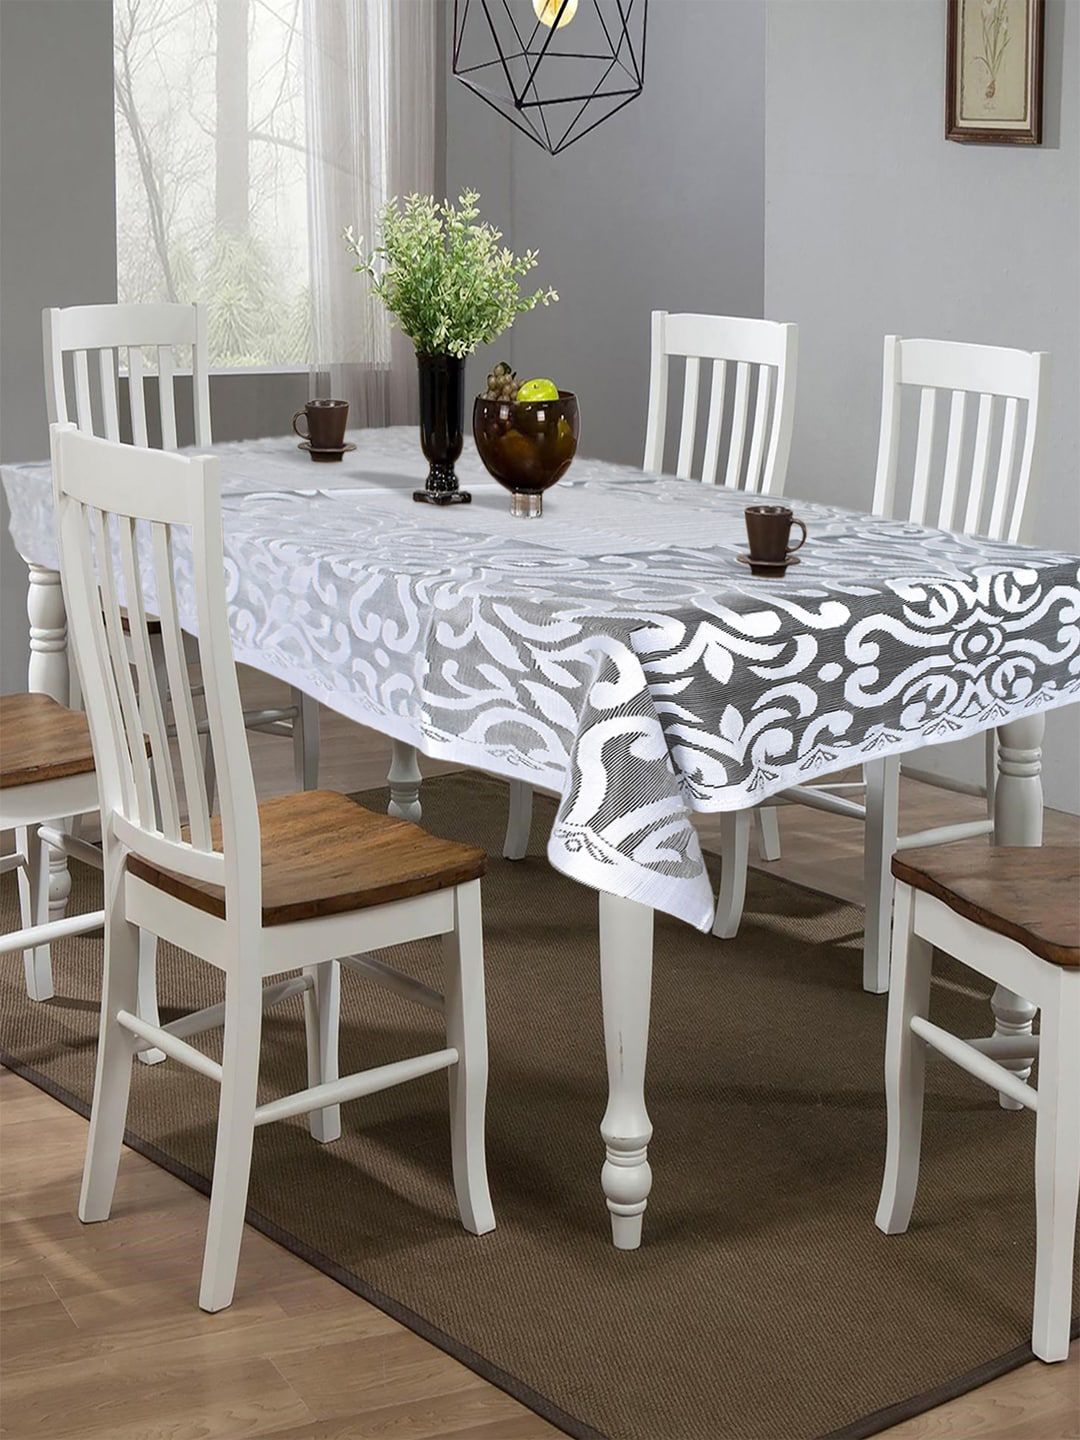 Kuber Industries White 6-Seater Printed Cotton Dining Table Cover Price in India